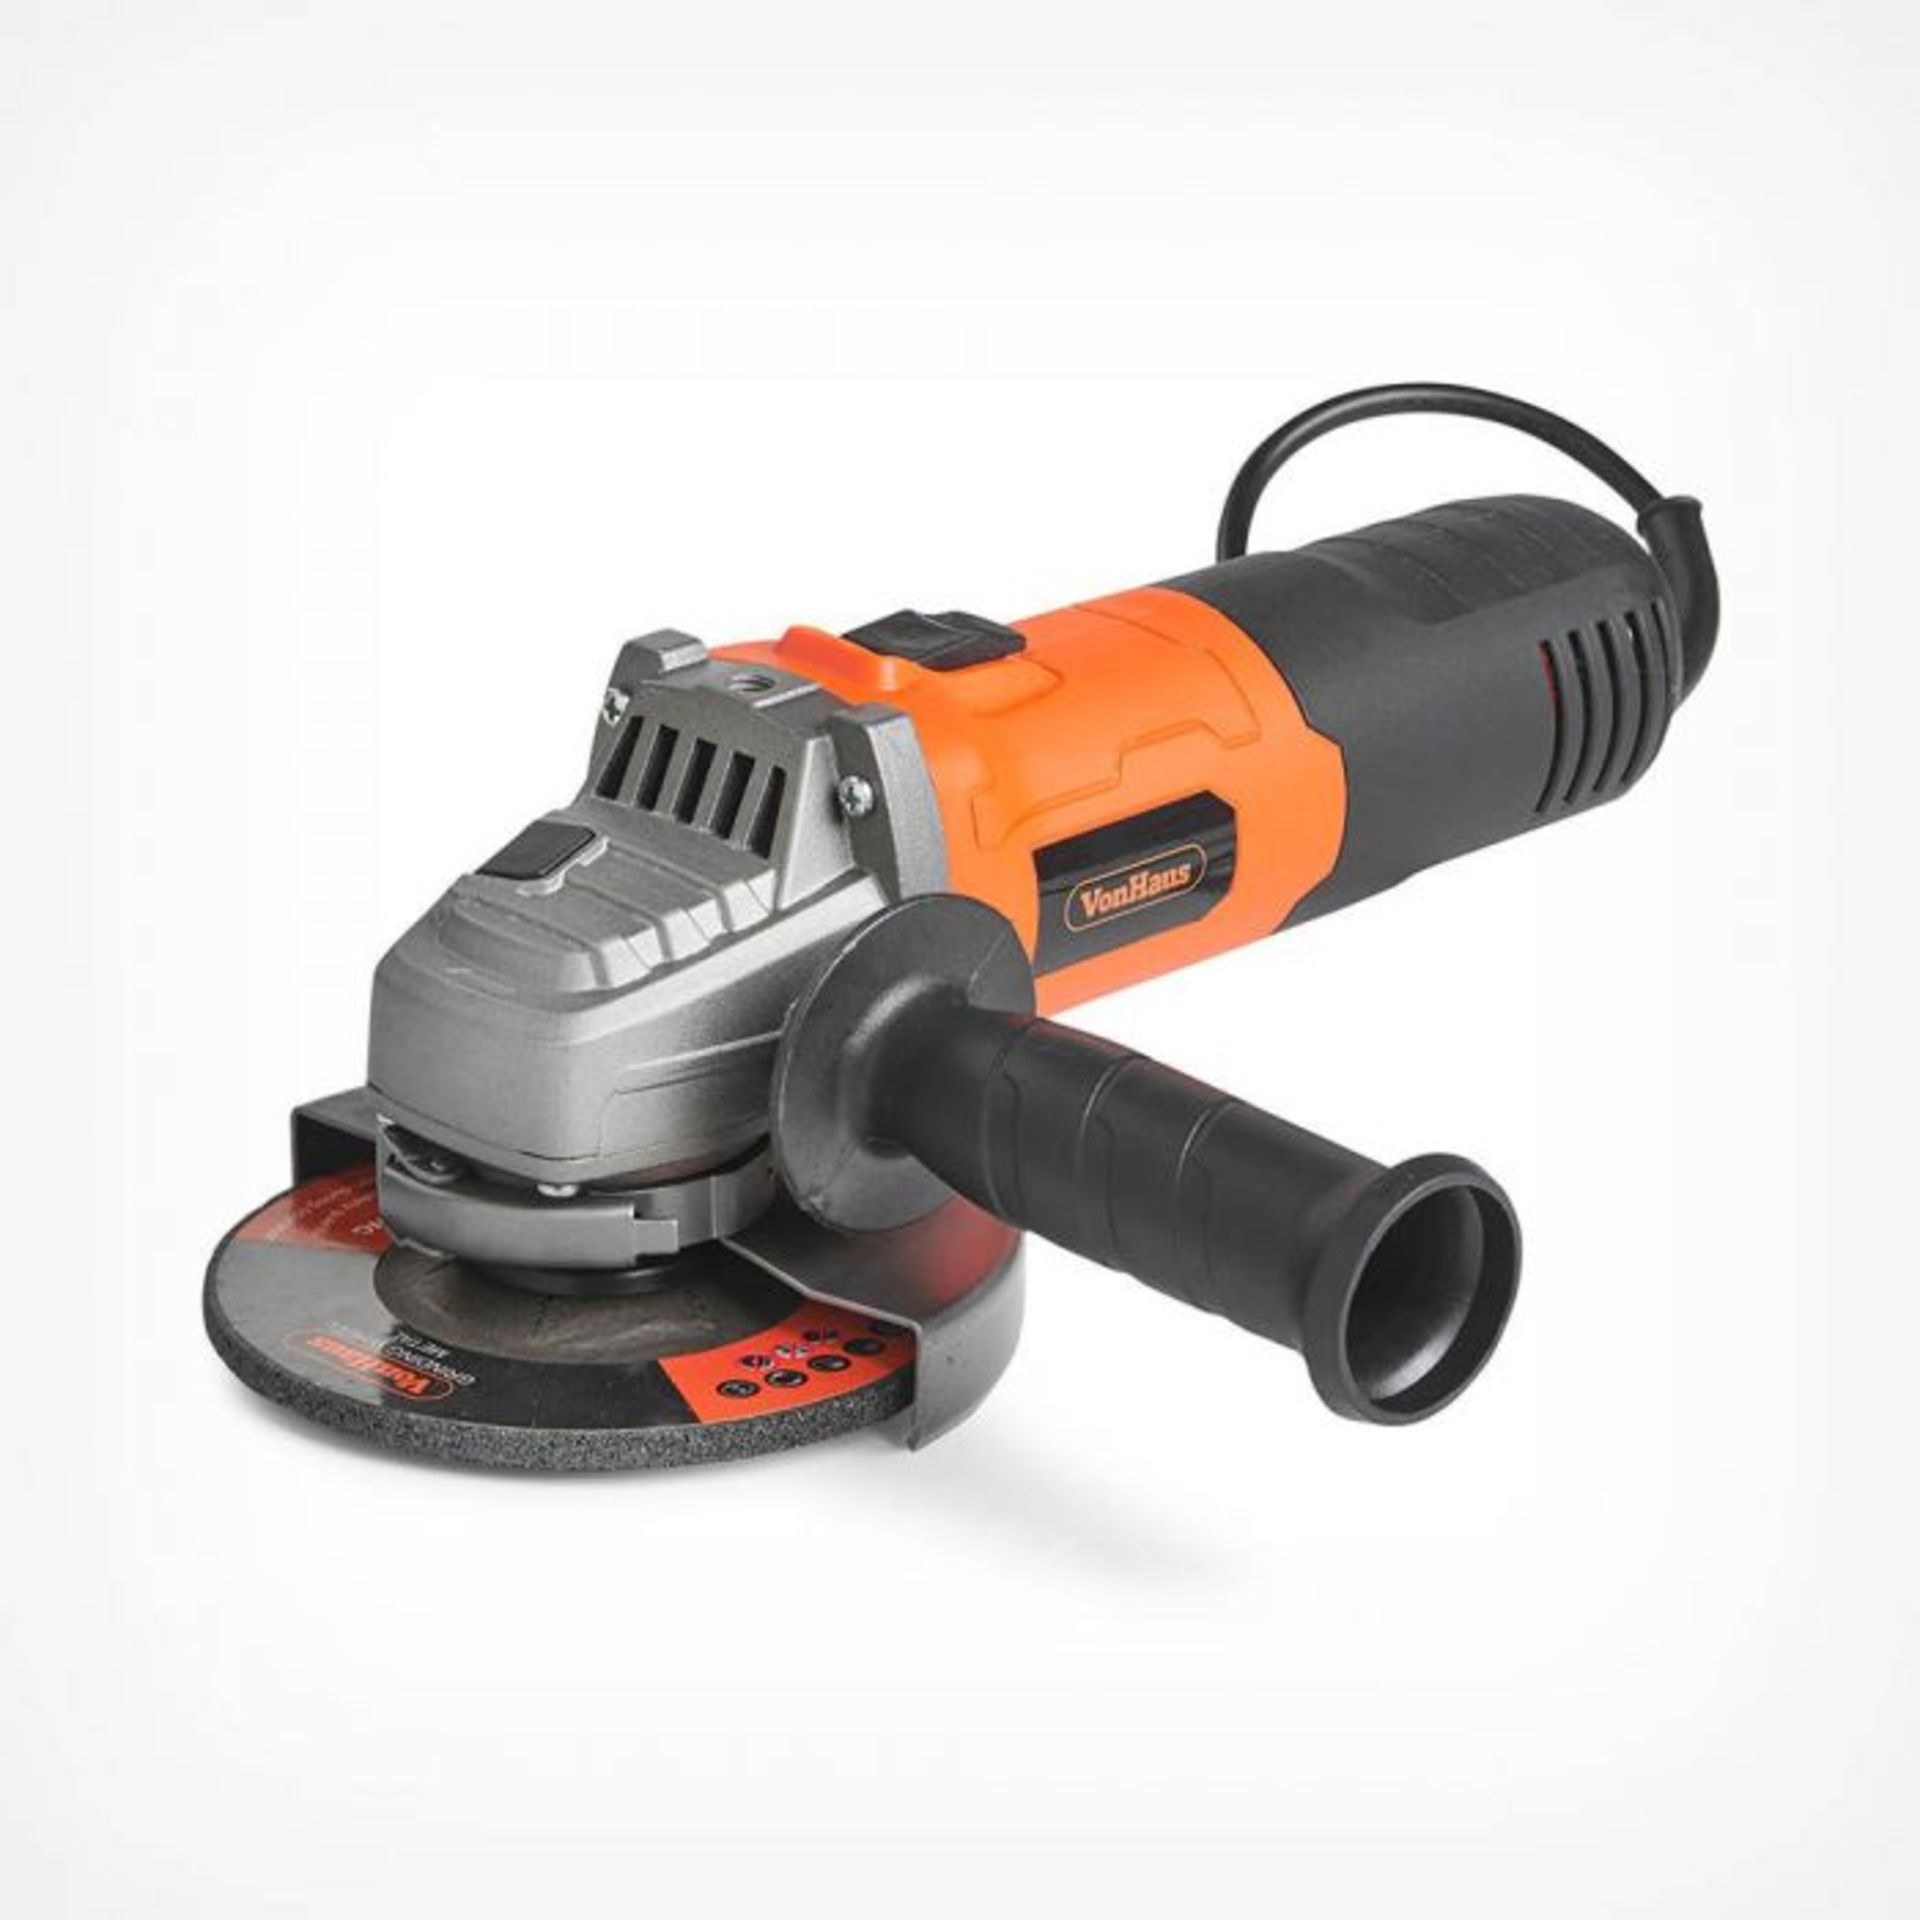 125mm 900W (5") Angle Grinder. Whether you’re restoring old cars, cleaning up rusty railings or